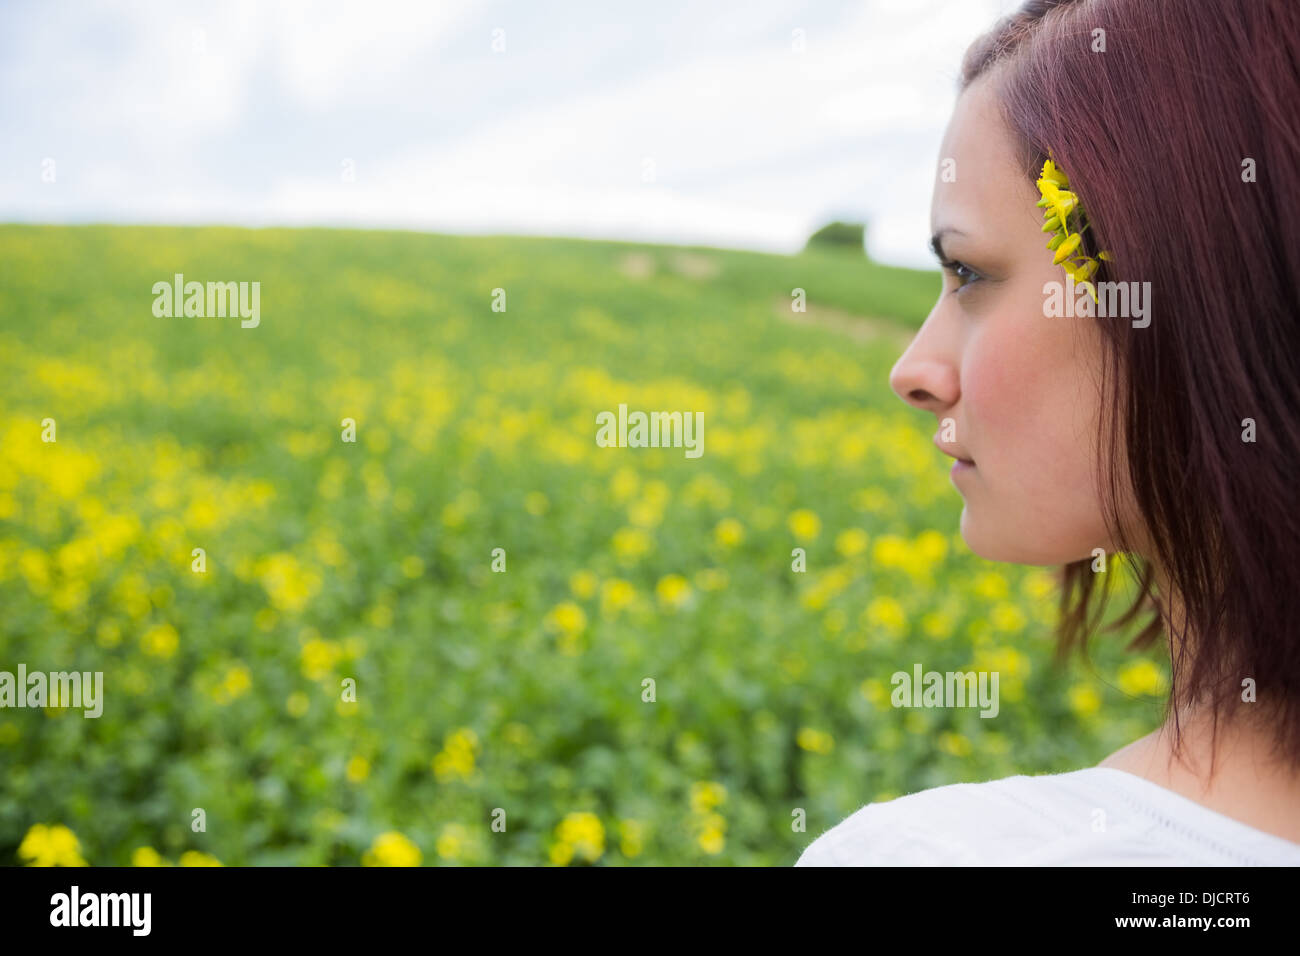 Brunette looking at field of yellow flowers Stock Photo